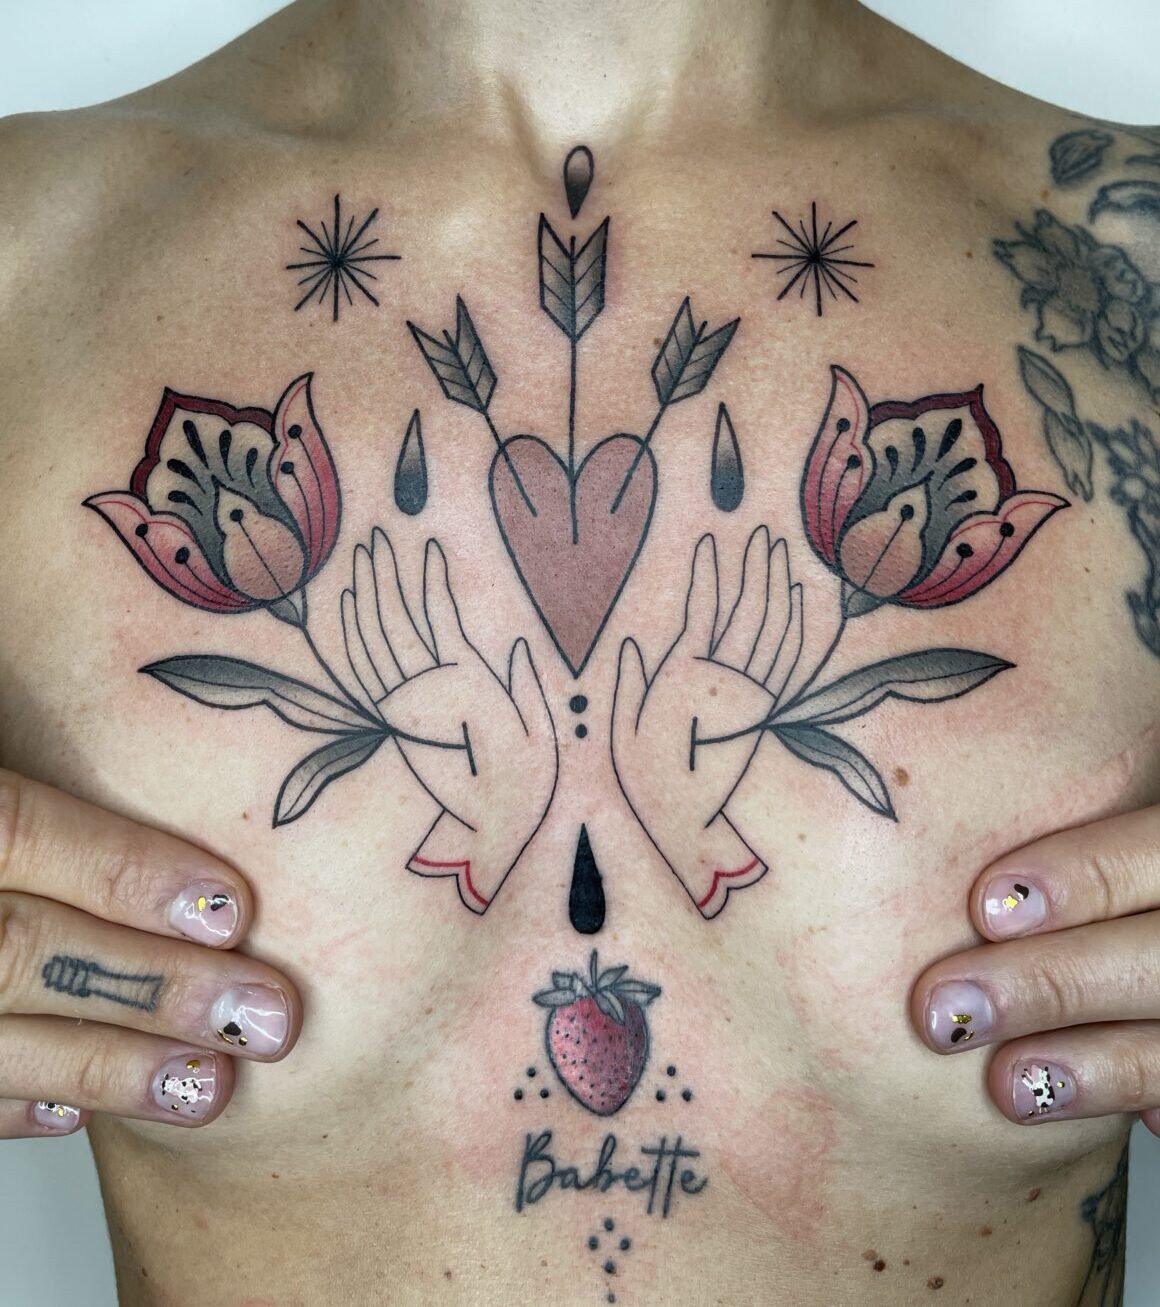 Tattoo by Lucille Ninivaggi, @lucille_roots